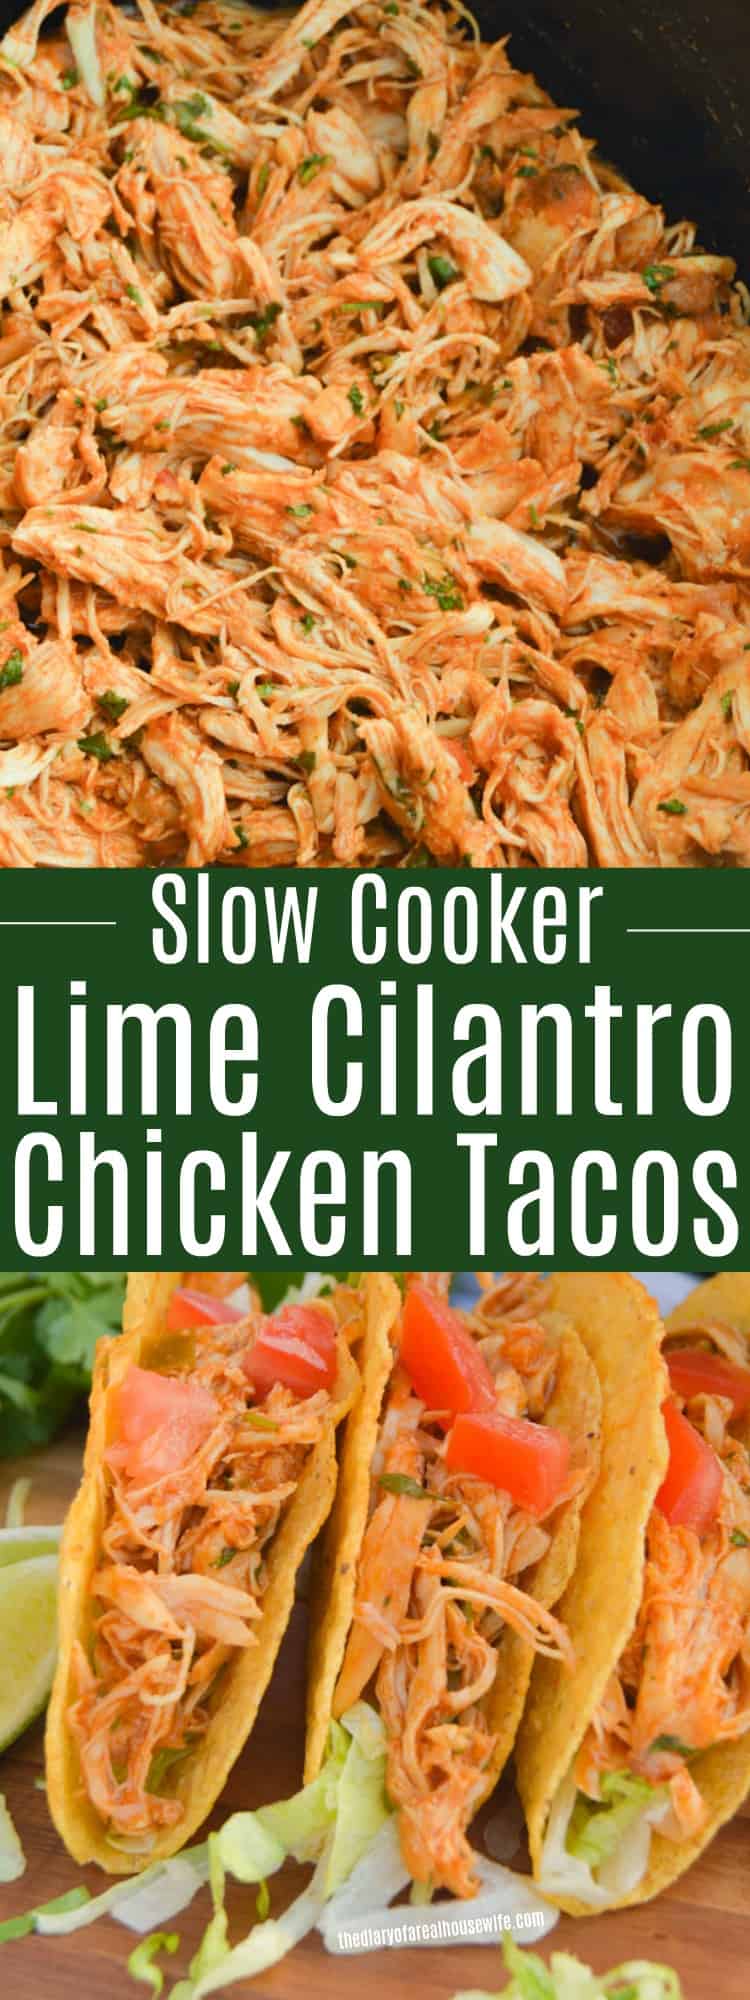 Slow Cooker Cilantro Lime Chicken Tacos
